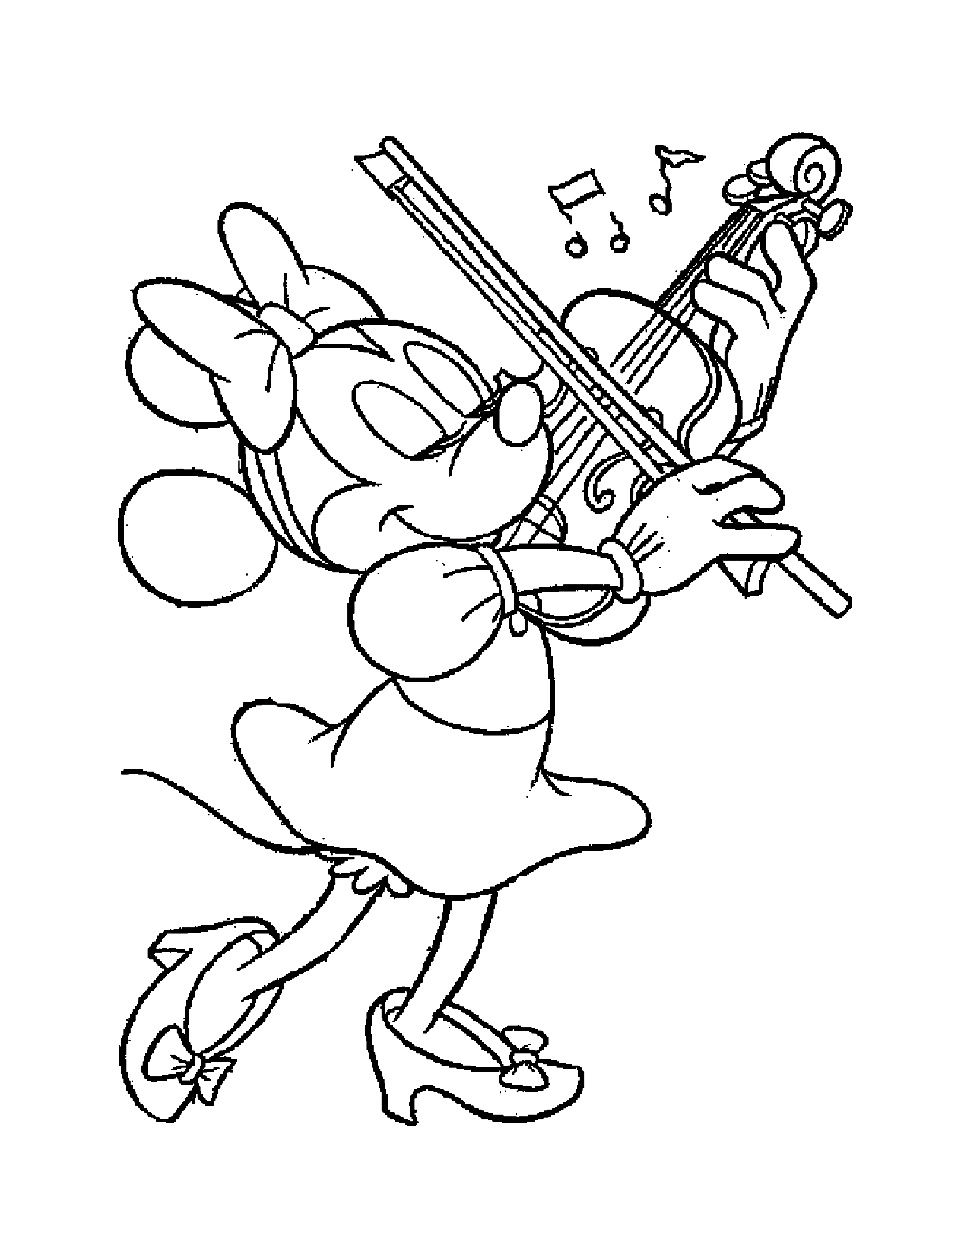 Coloriage Minnie Luxe Collection Minnie Violon Coloriage Minnie Coloriages Pour Enfants